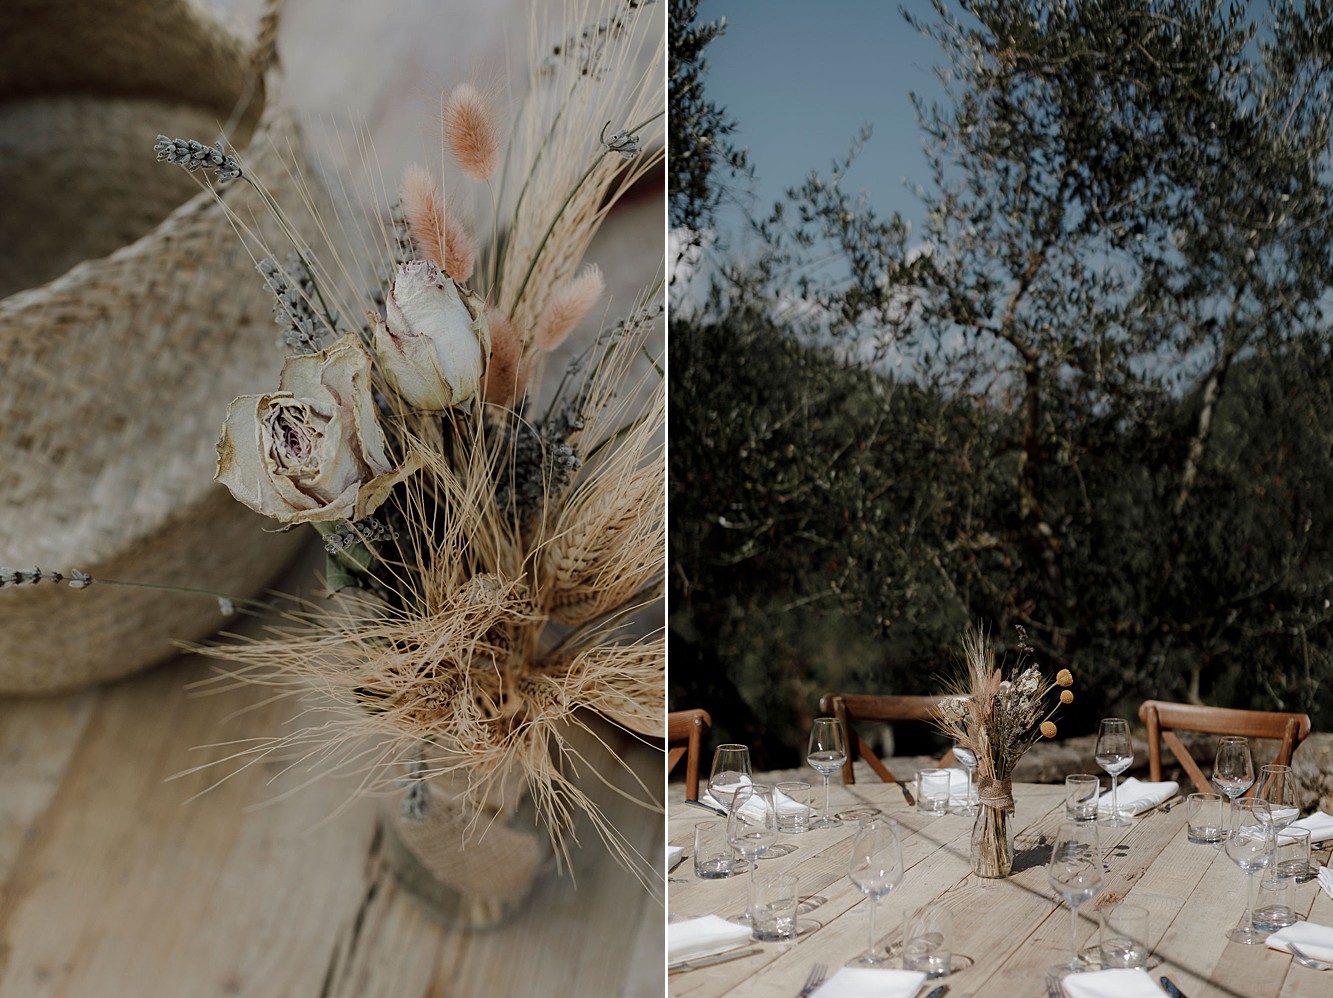 Vintage dress glamorous Italian wedding  - An Old Glamour + Nature Inspired Wedding in Italy with a Bride in Pin Curls + Two Vintage Dresses